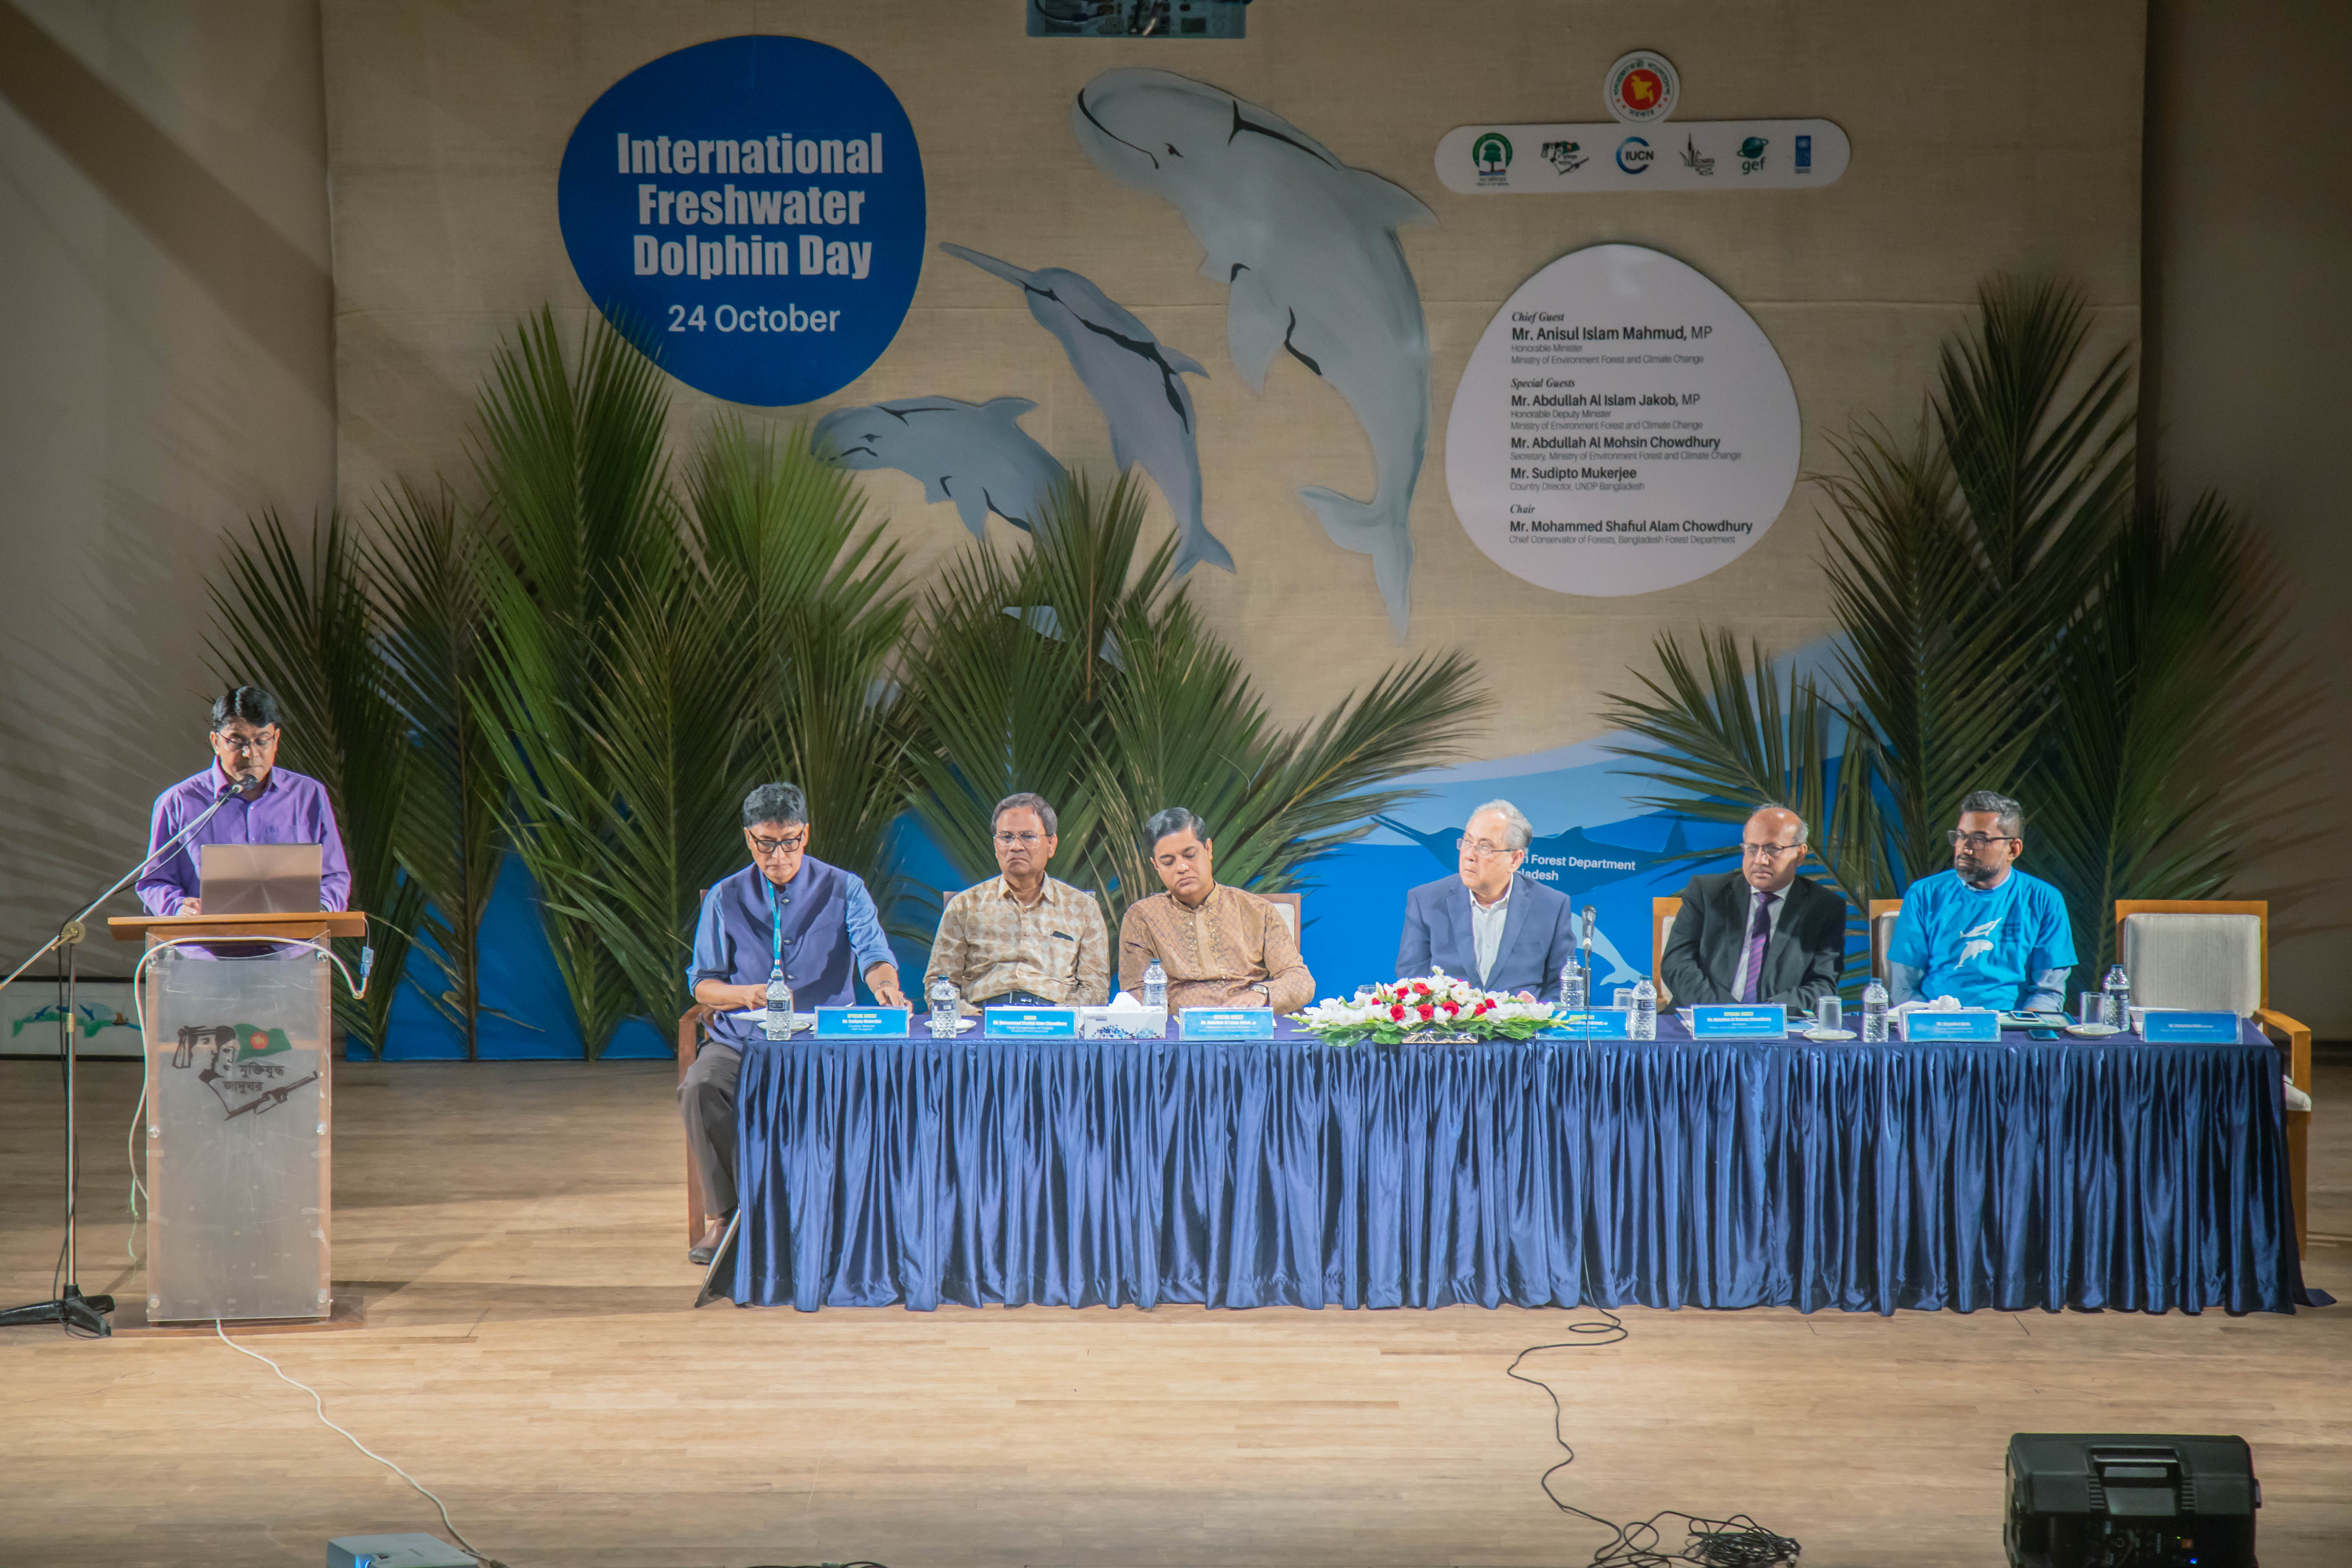 Guests at the Inaugural Session of the International Freshwater Dolphin Day.